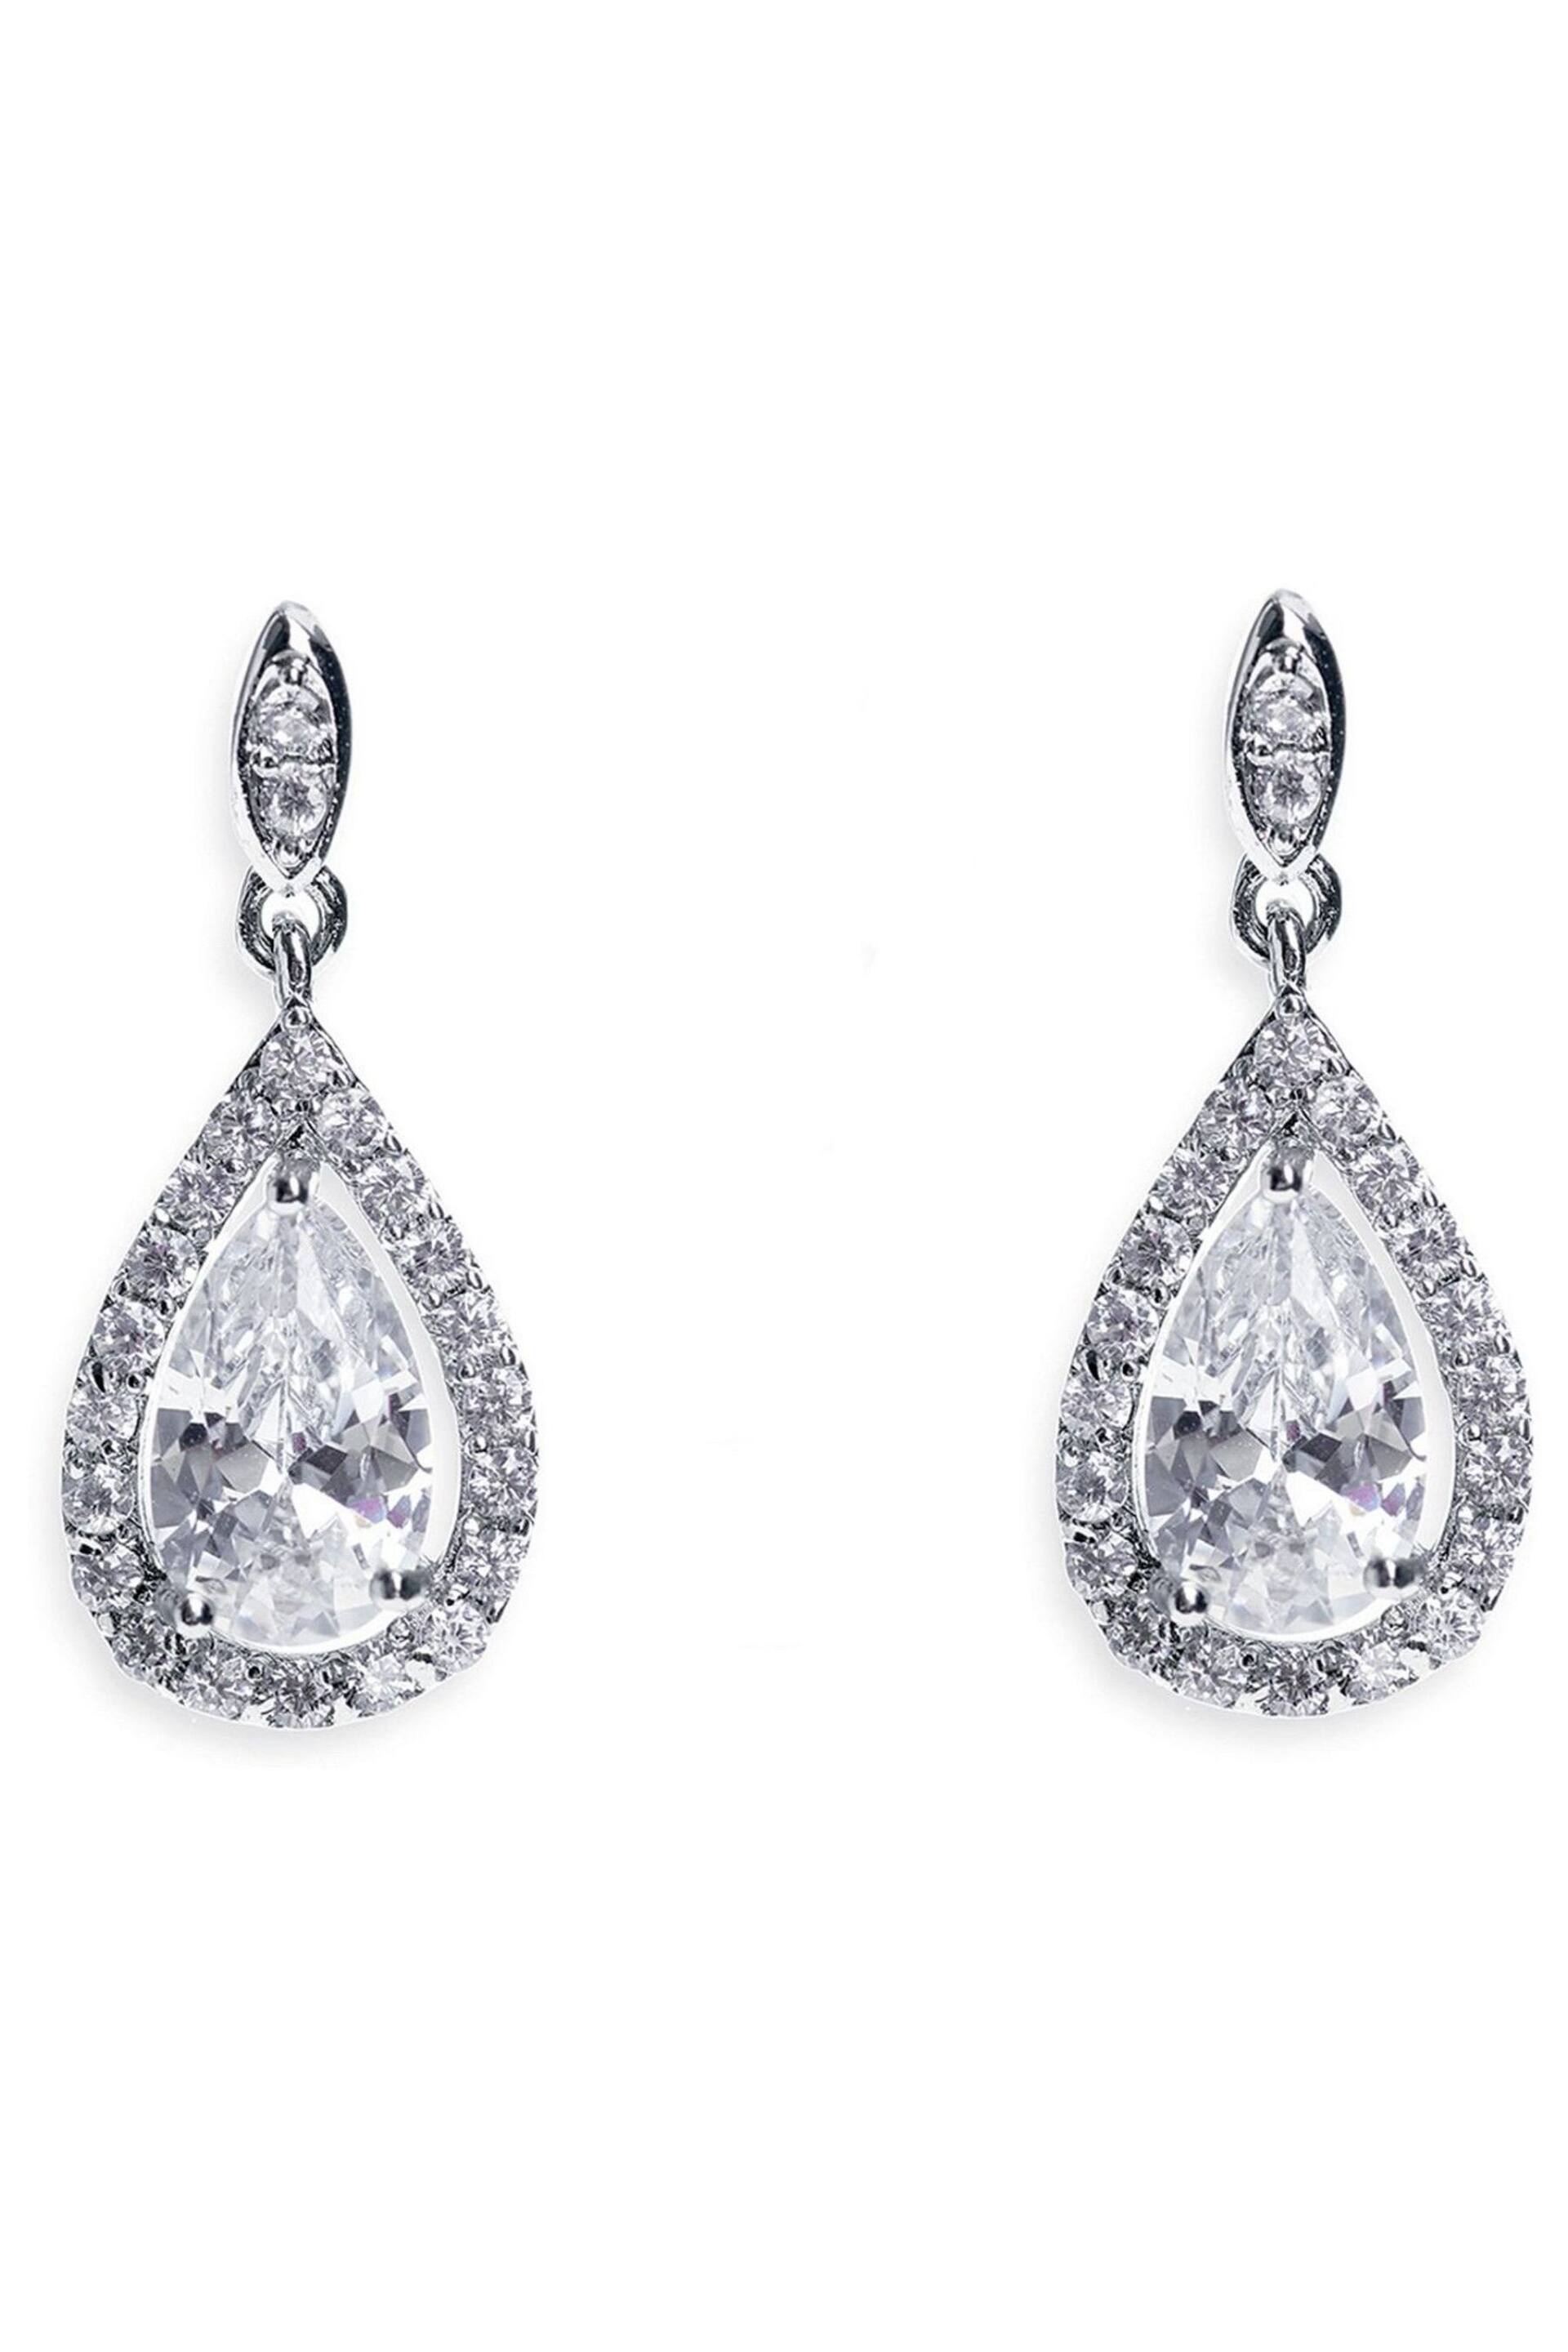 Ivory & Co Rhodium Belmont And Crystal Teardrop Earring - Image 1 of 5